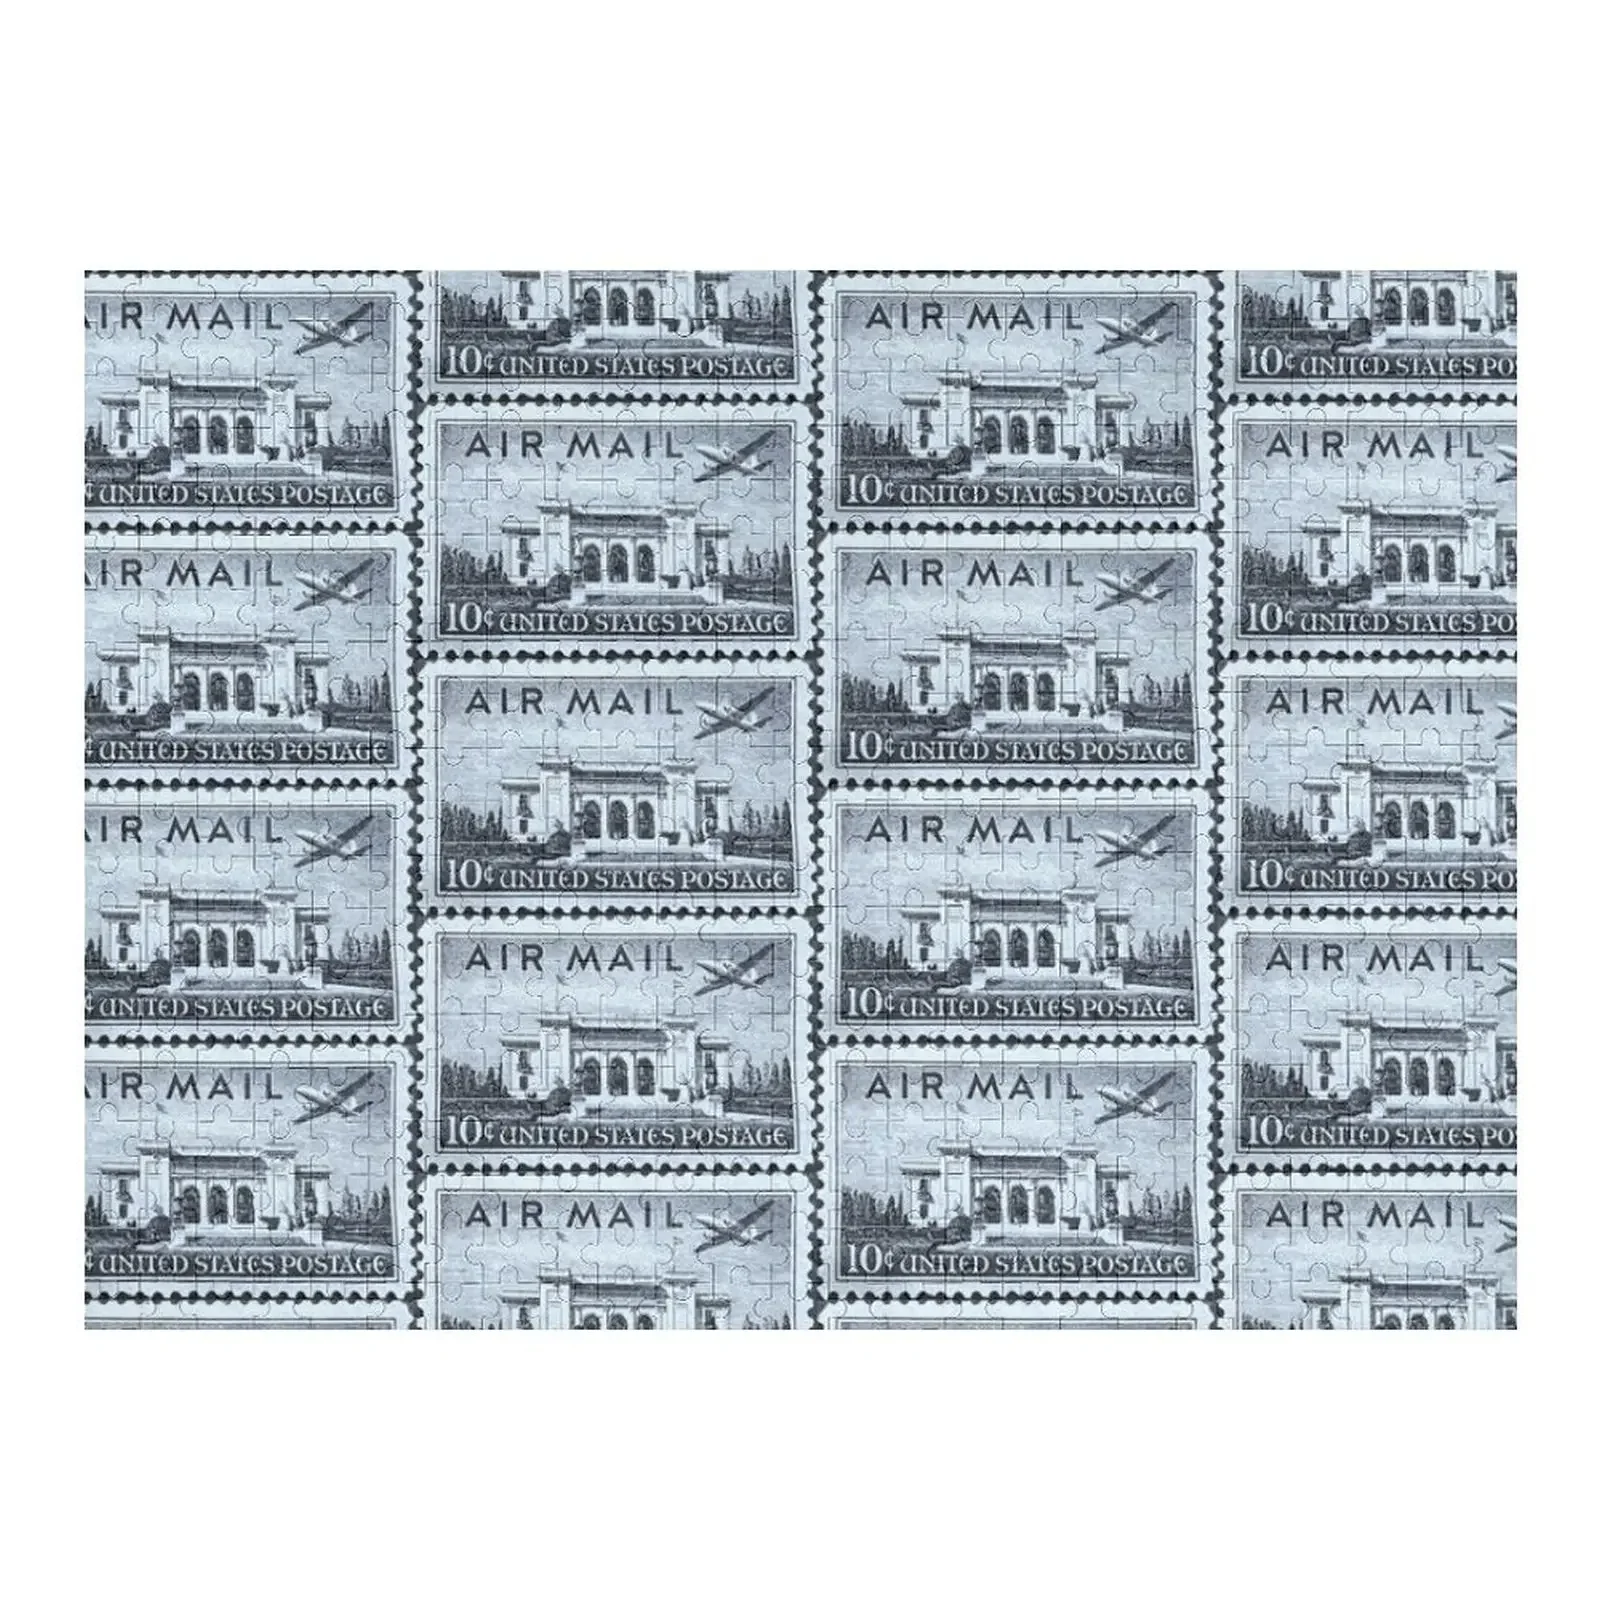 Pan American Building Air Mail Vintage Postage Stamp Jigsaw Puzzle Photo Iq Jigsaw Custom Works Of Art Puzzle